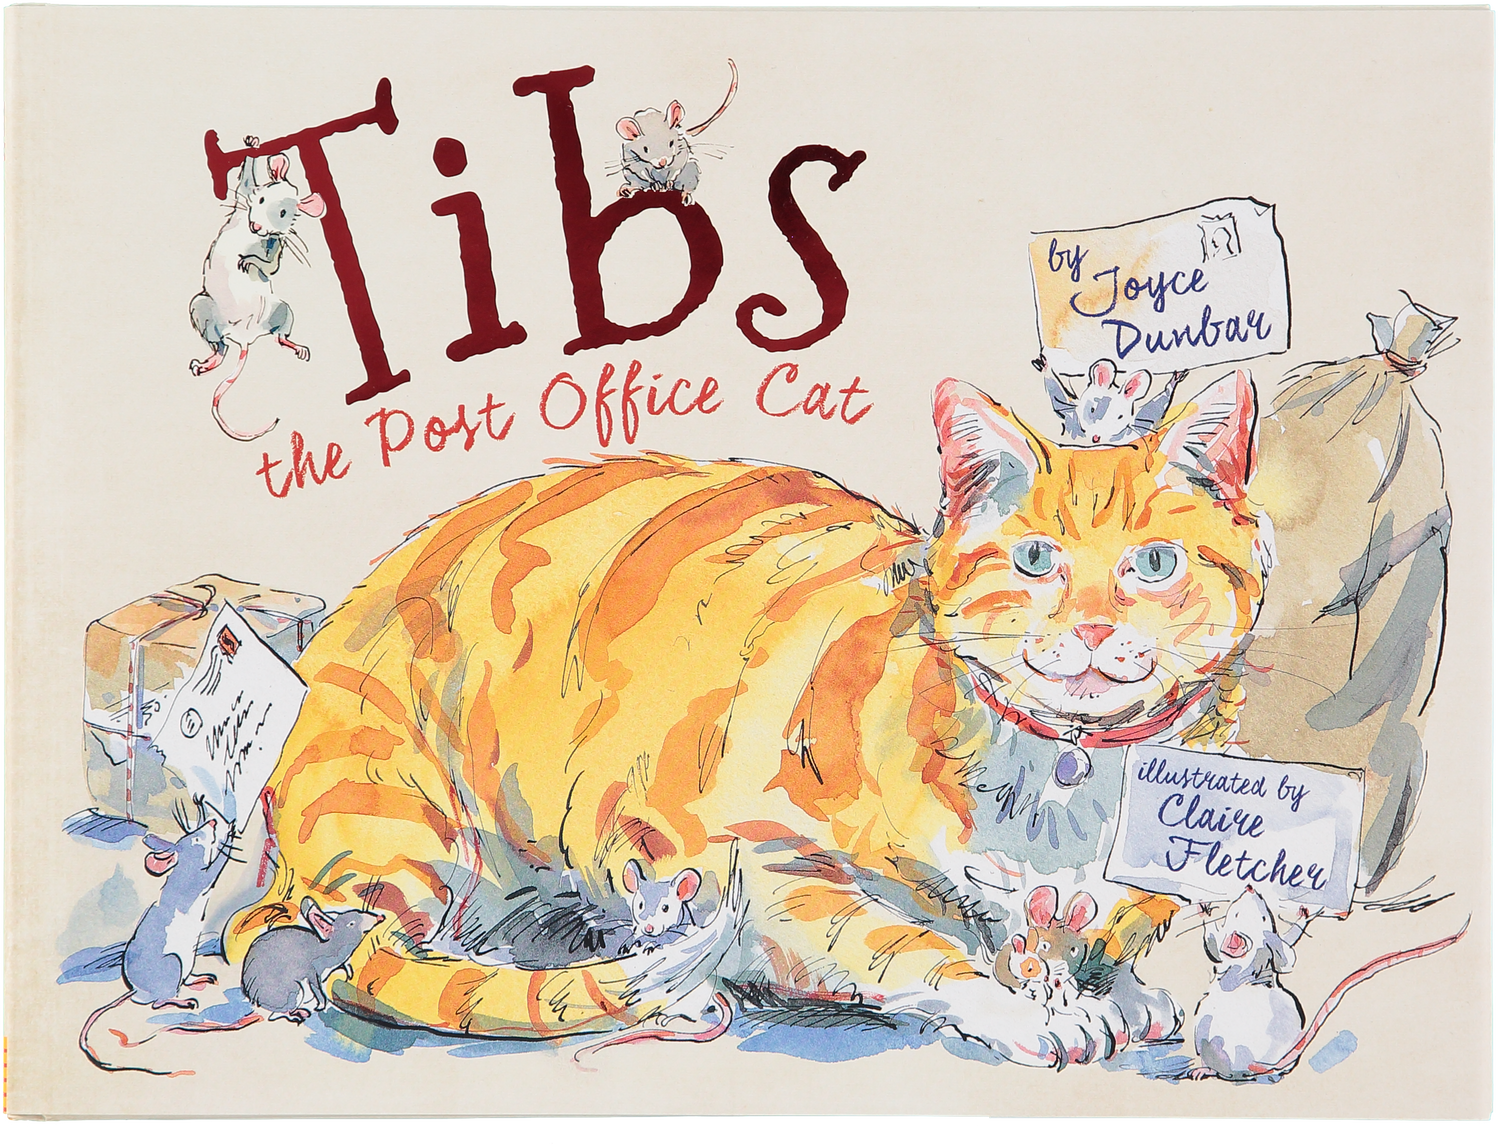 Tibs The Post Office Cat book